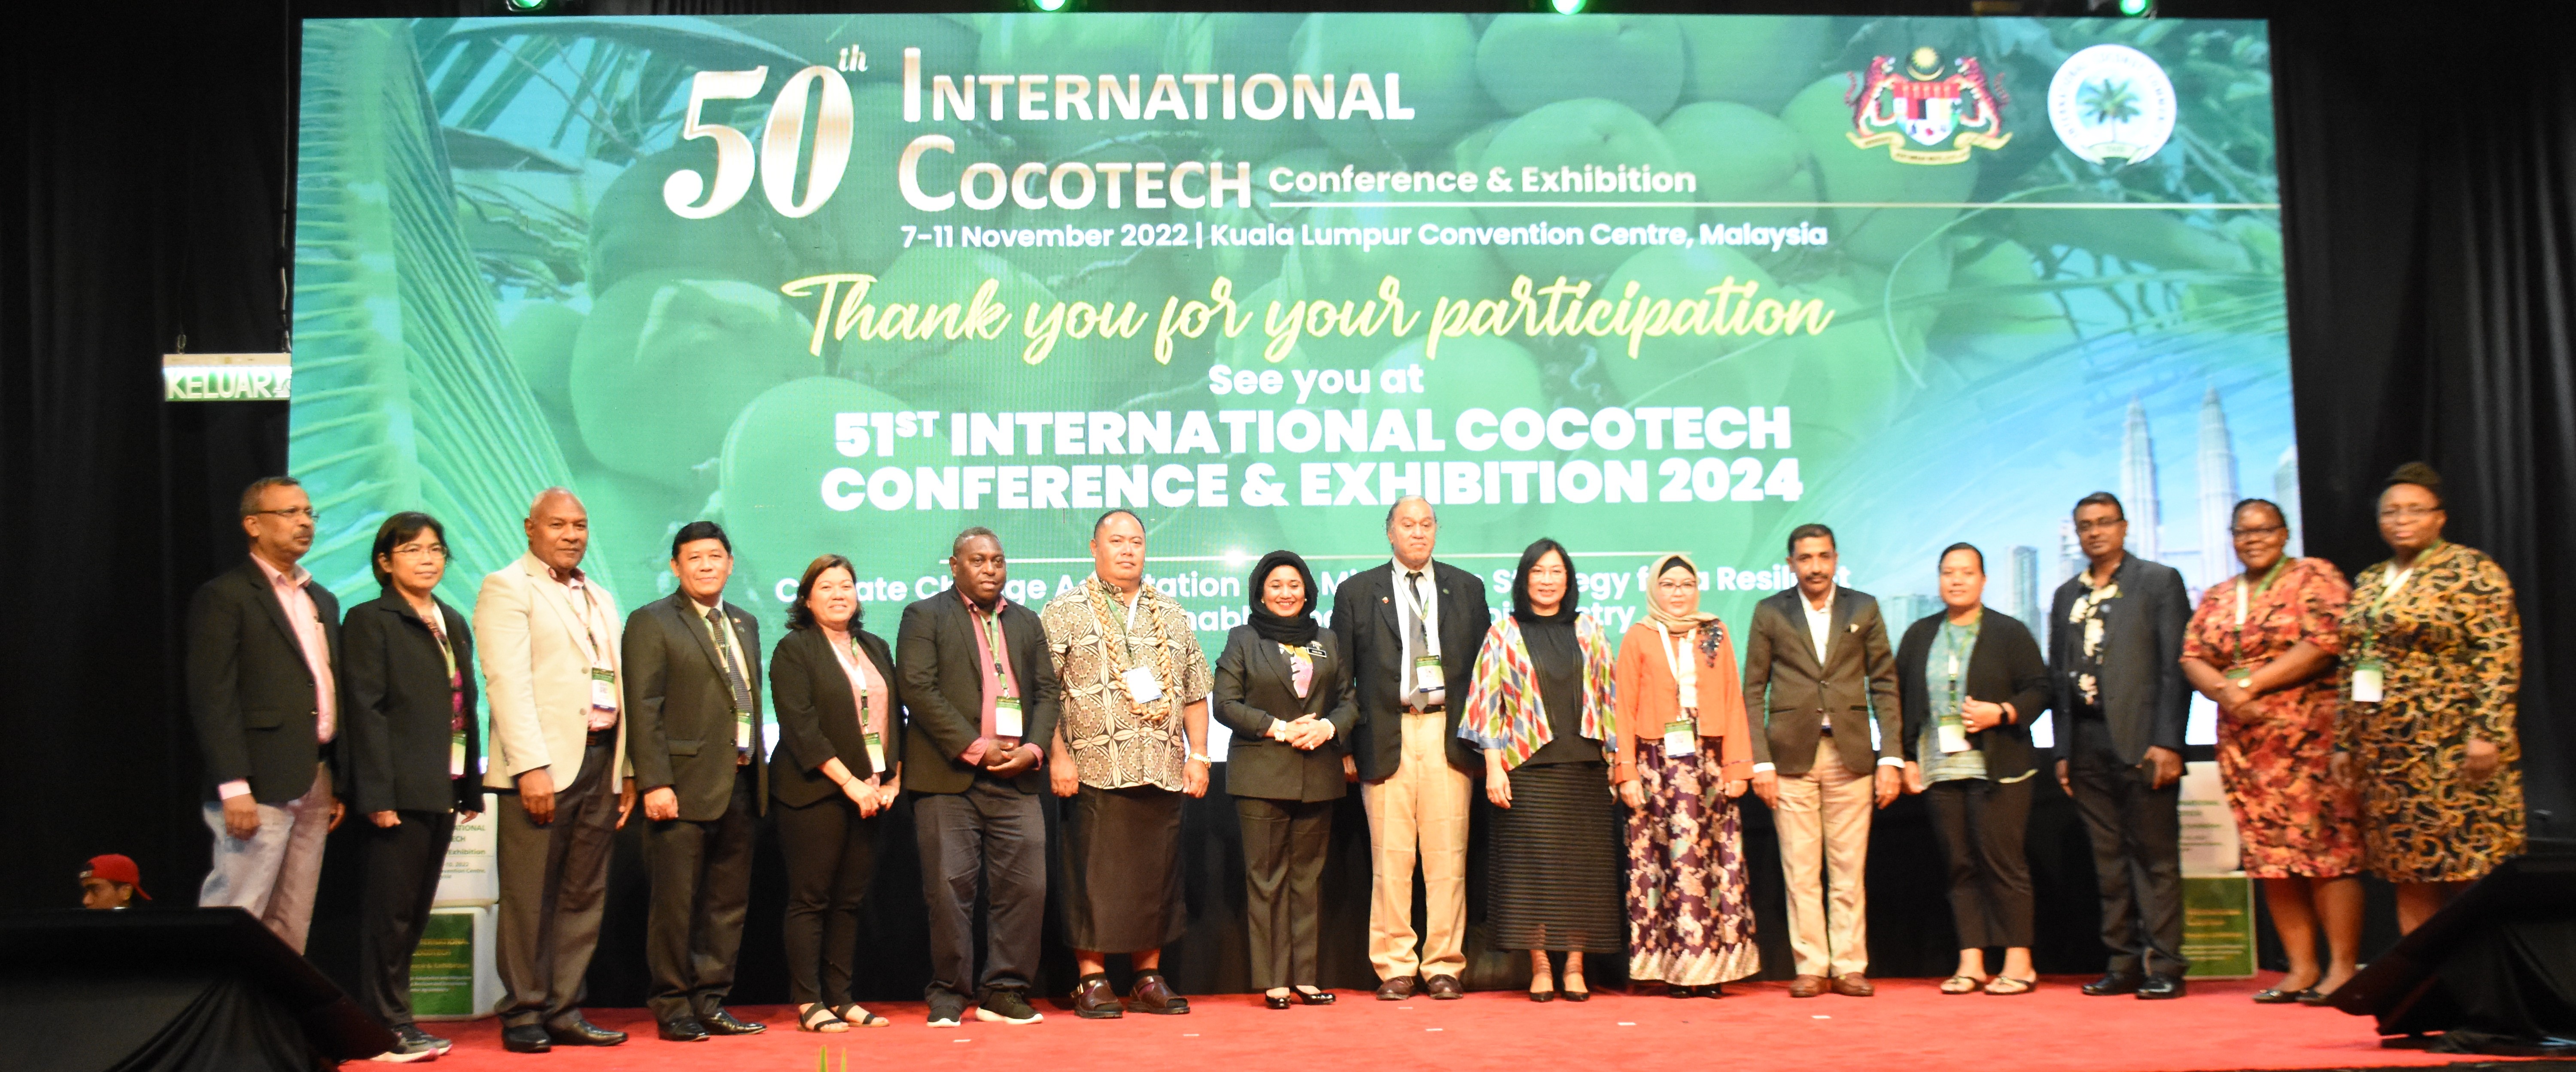 the-50th-international-cocotech-conference-exhibition-202220221117104356.JPG